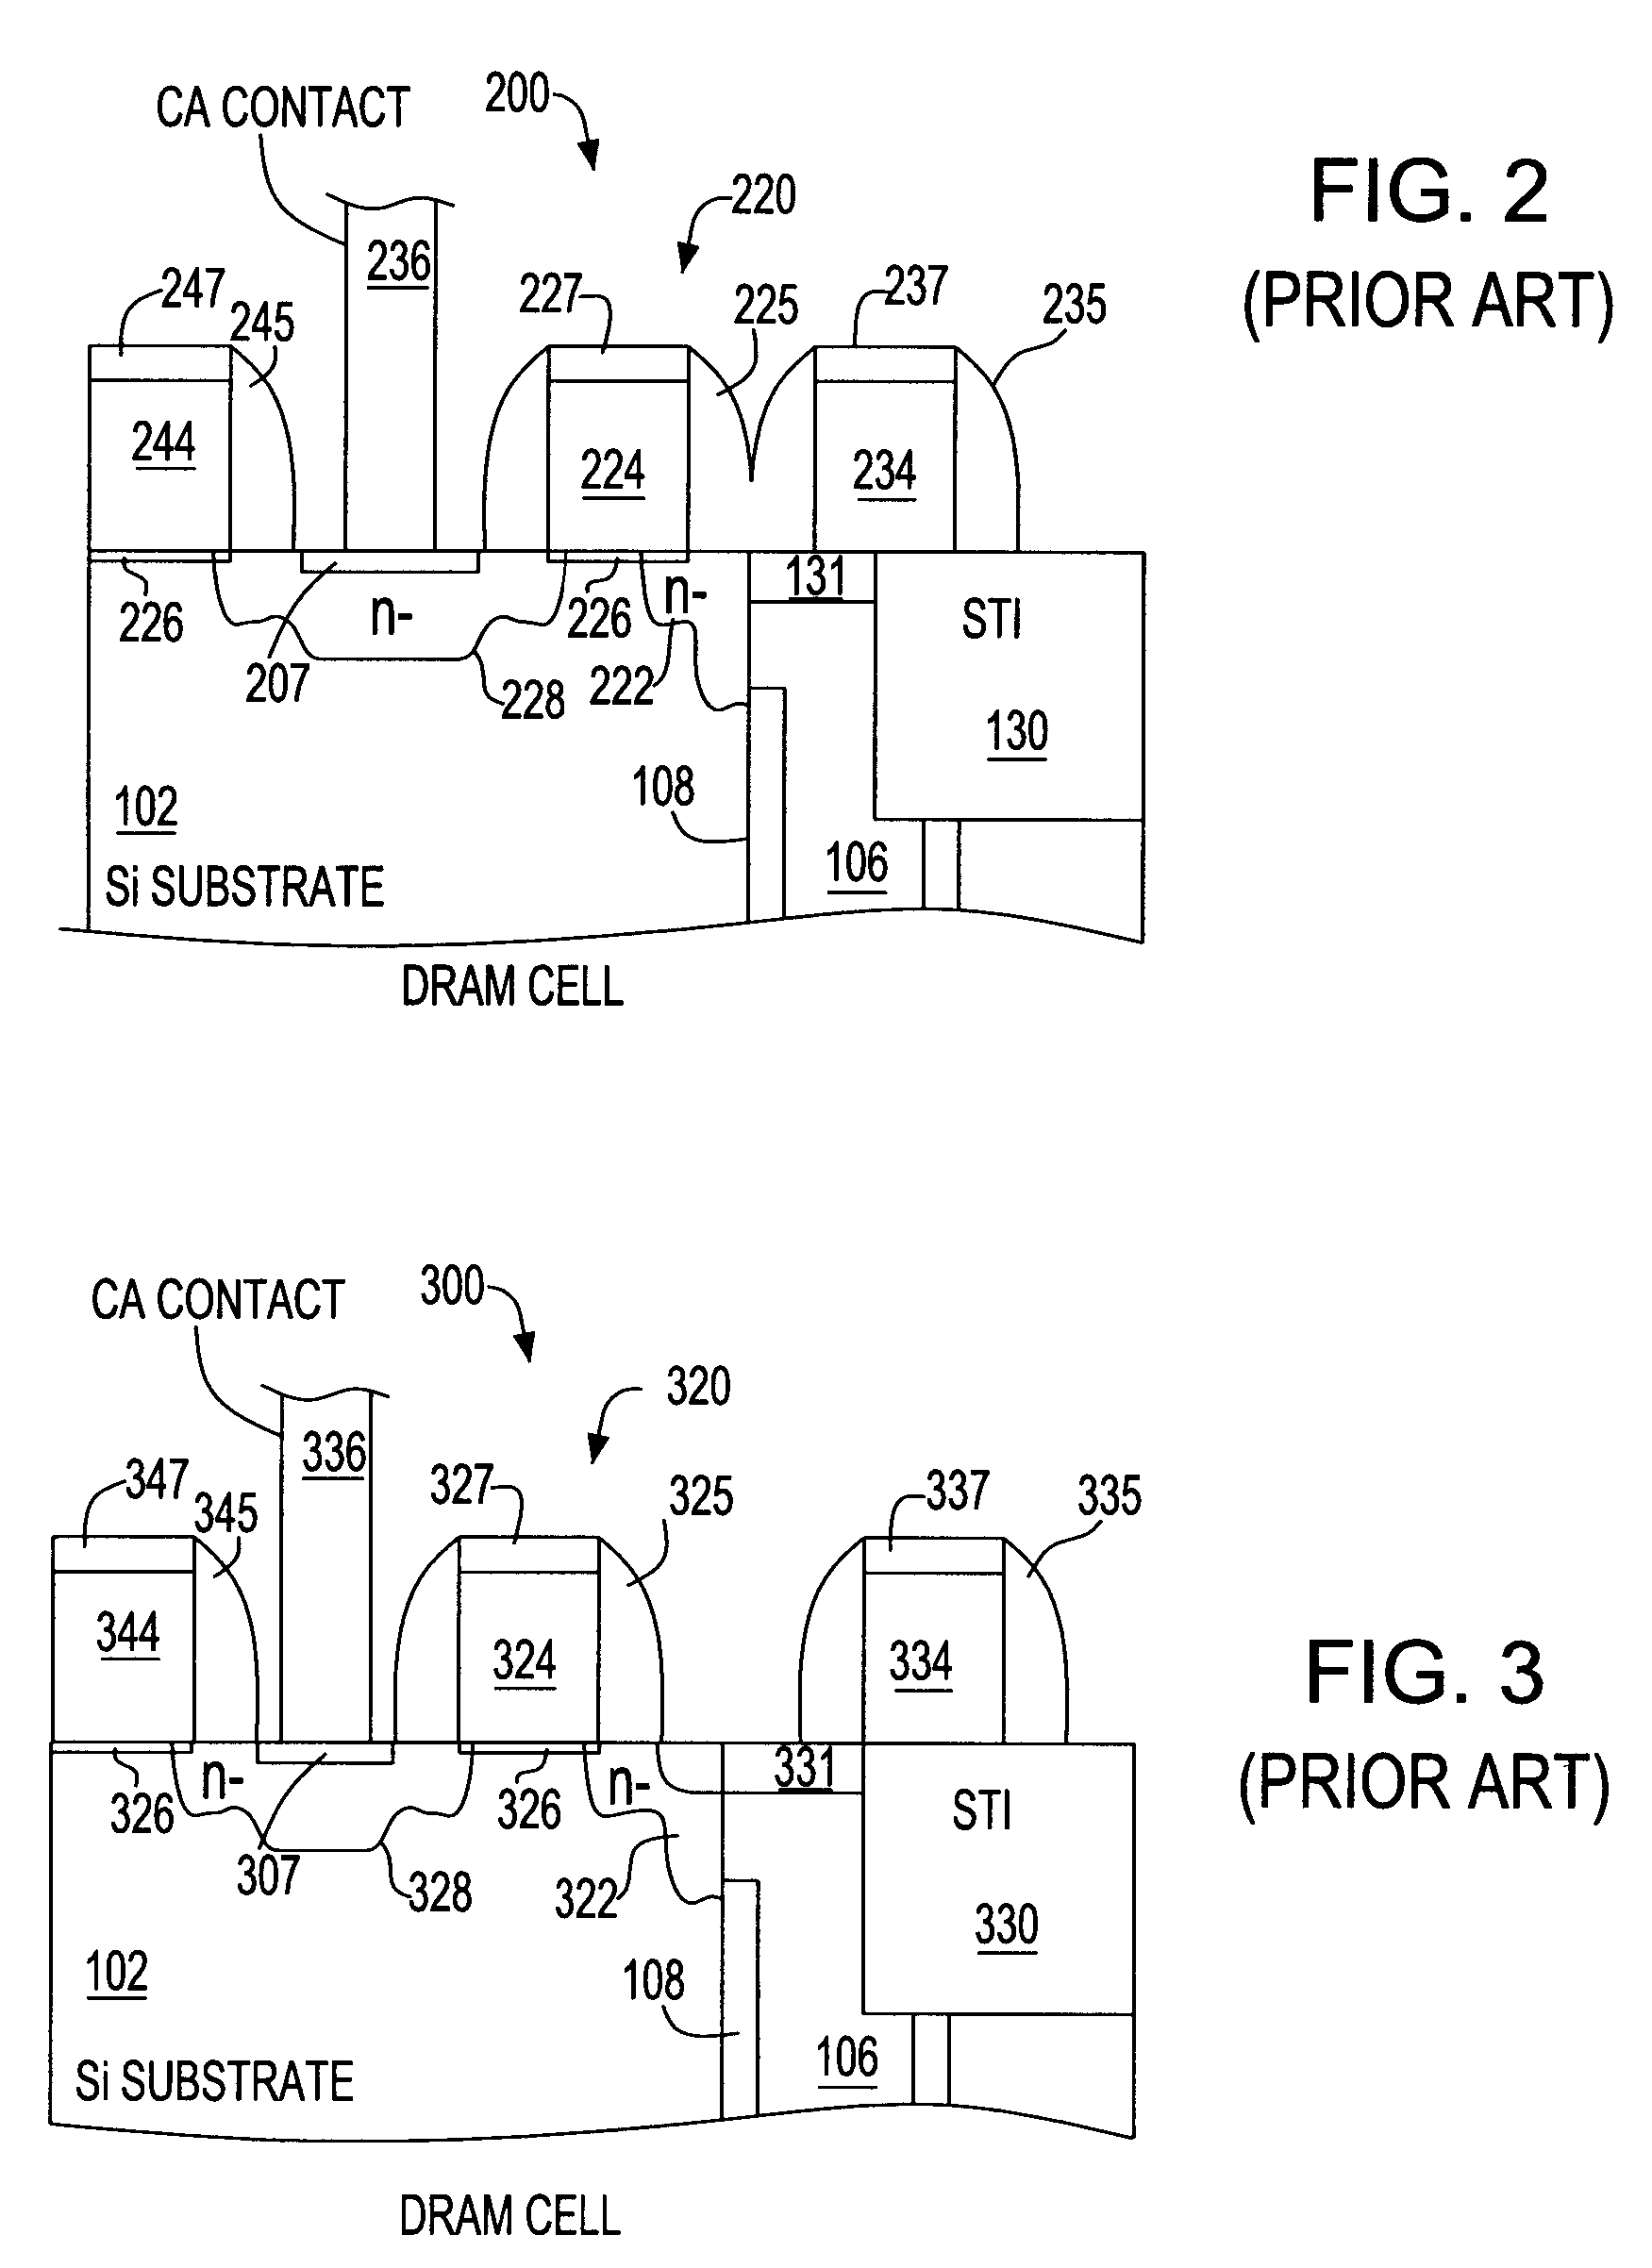 Self-aligned, silicided, trench-based, DRAM/EDRAM processes with improved retention